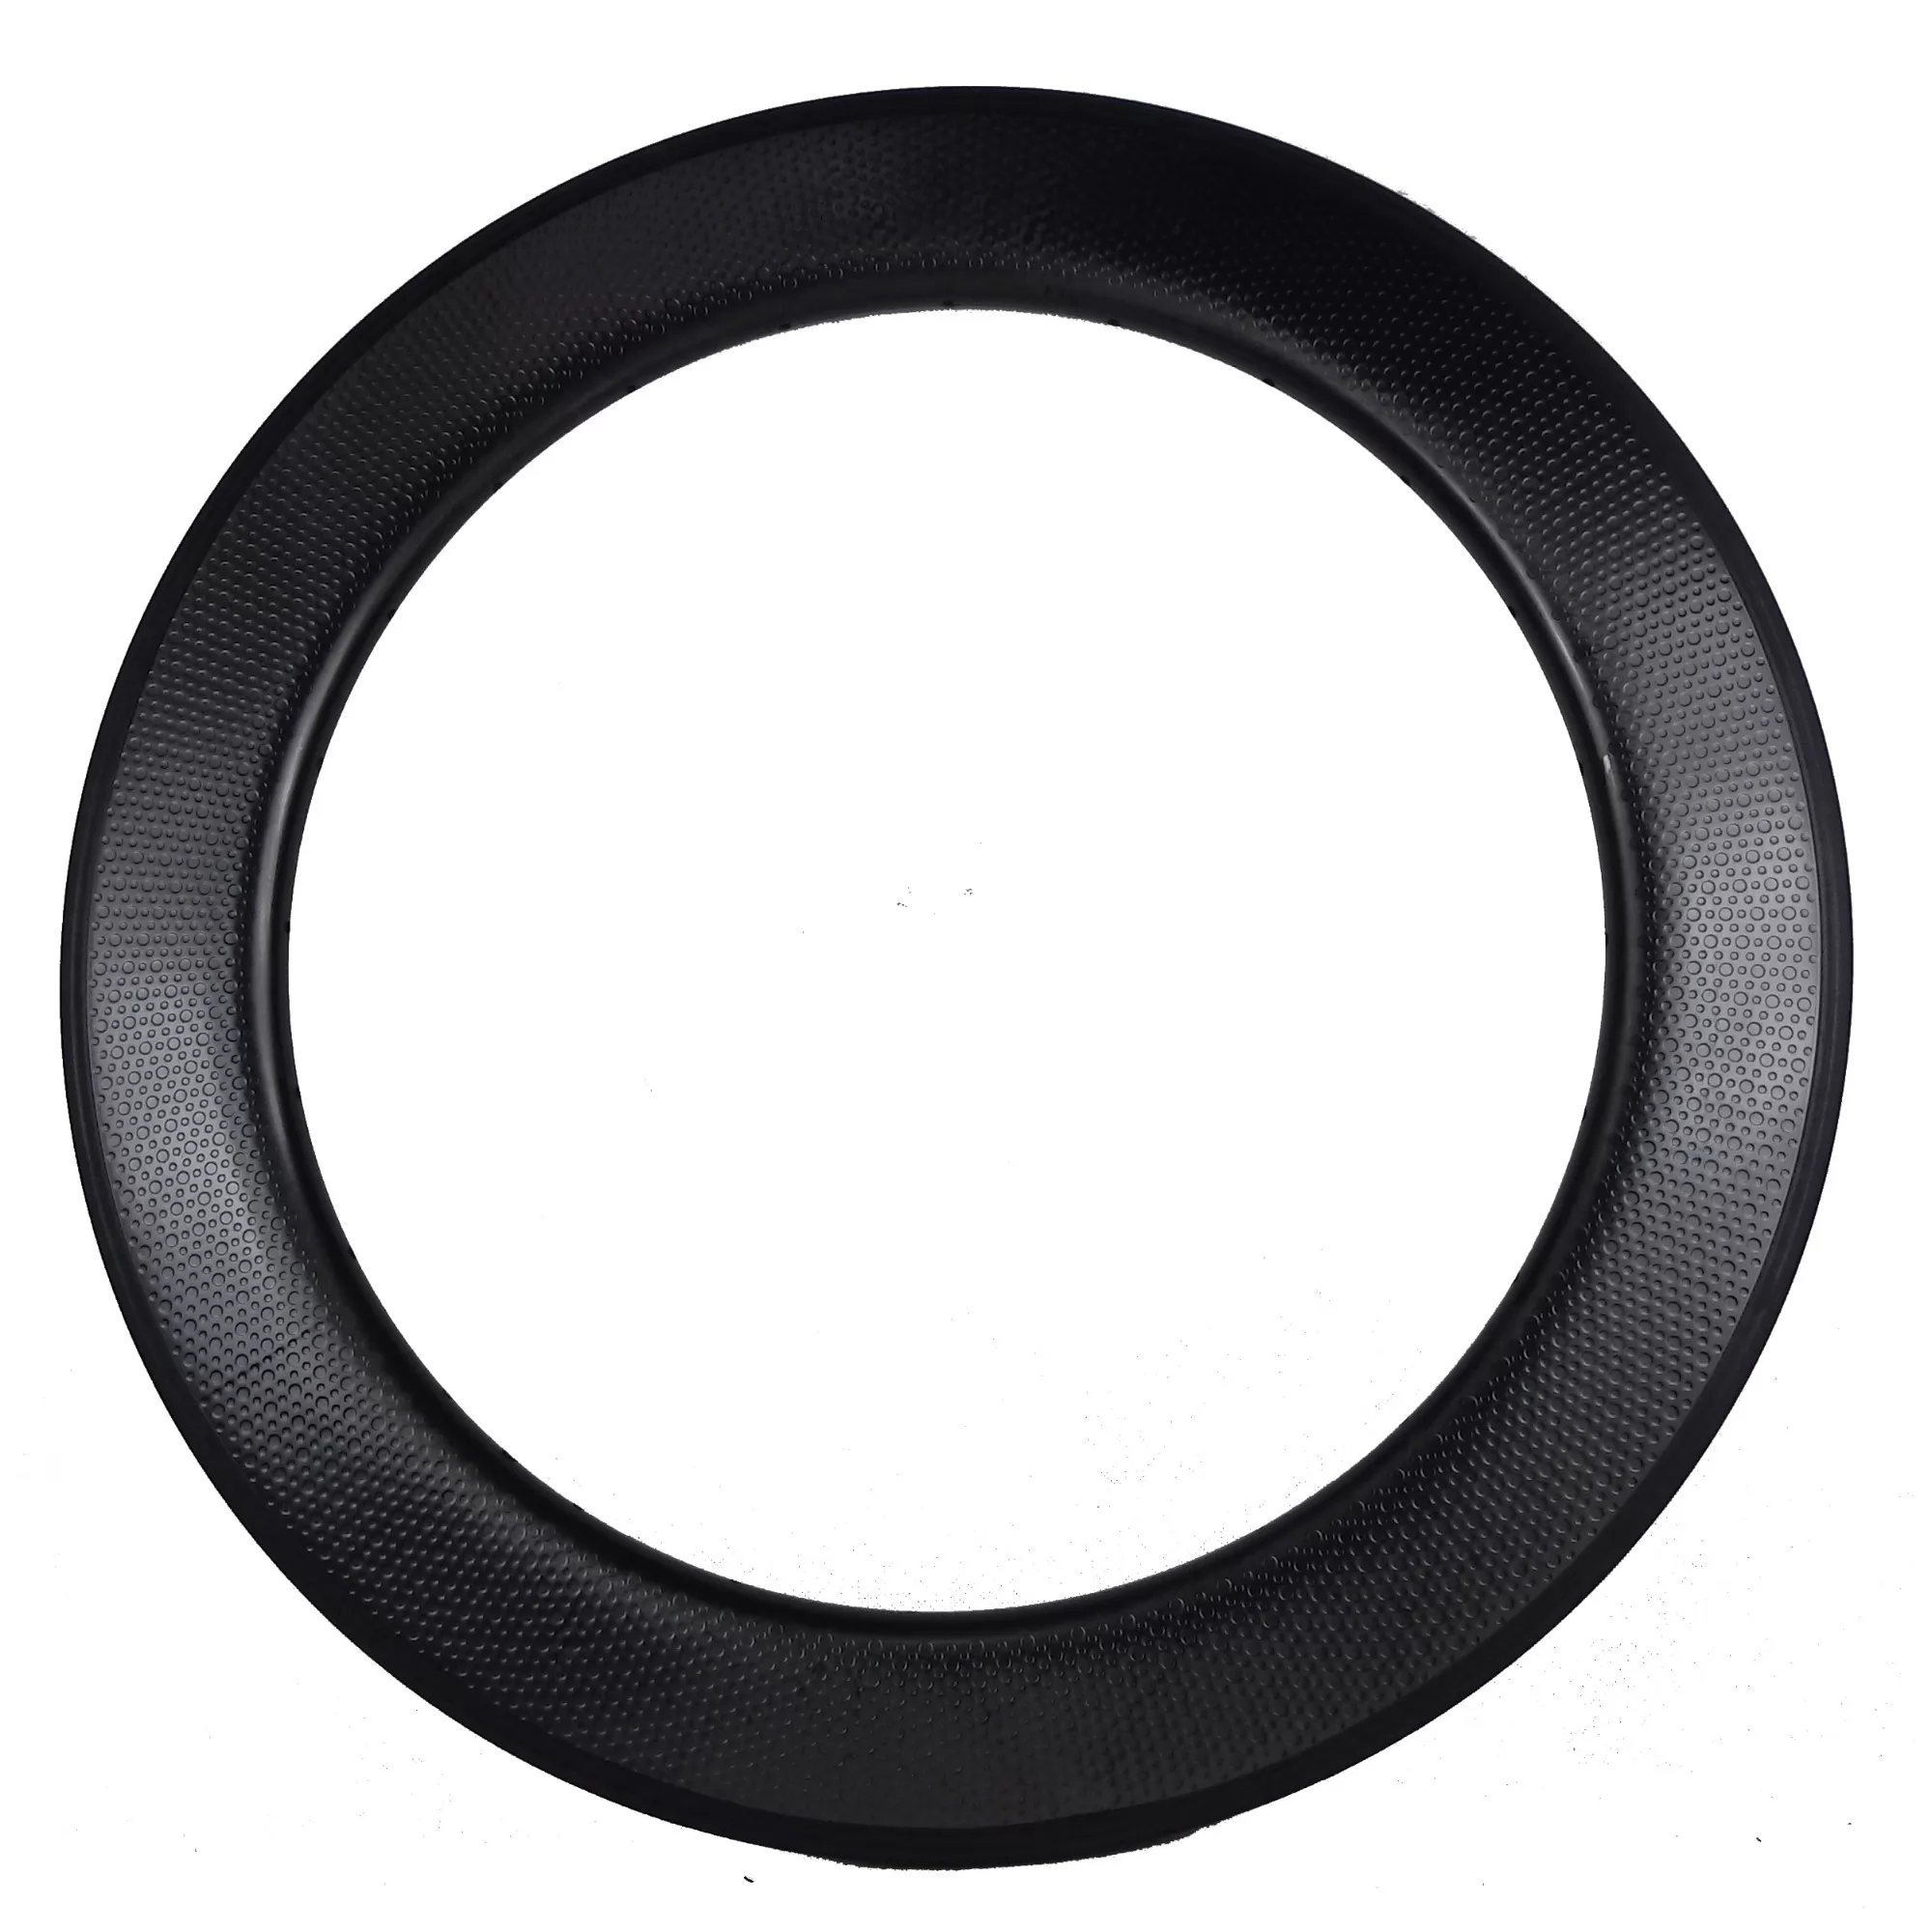 |CW26D80T/C| carbon rims 80mm dimple appearance UD original for track bike road ride fans love 26mm width clincher/tubular/tubeless